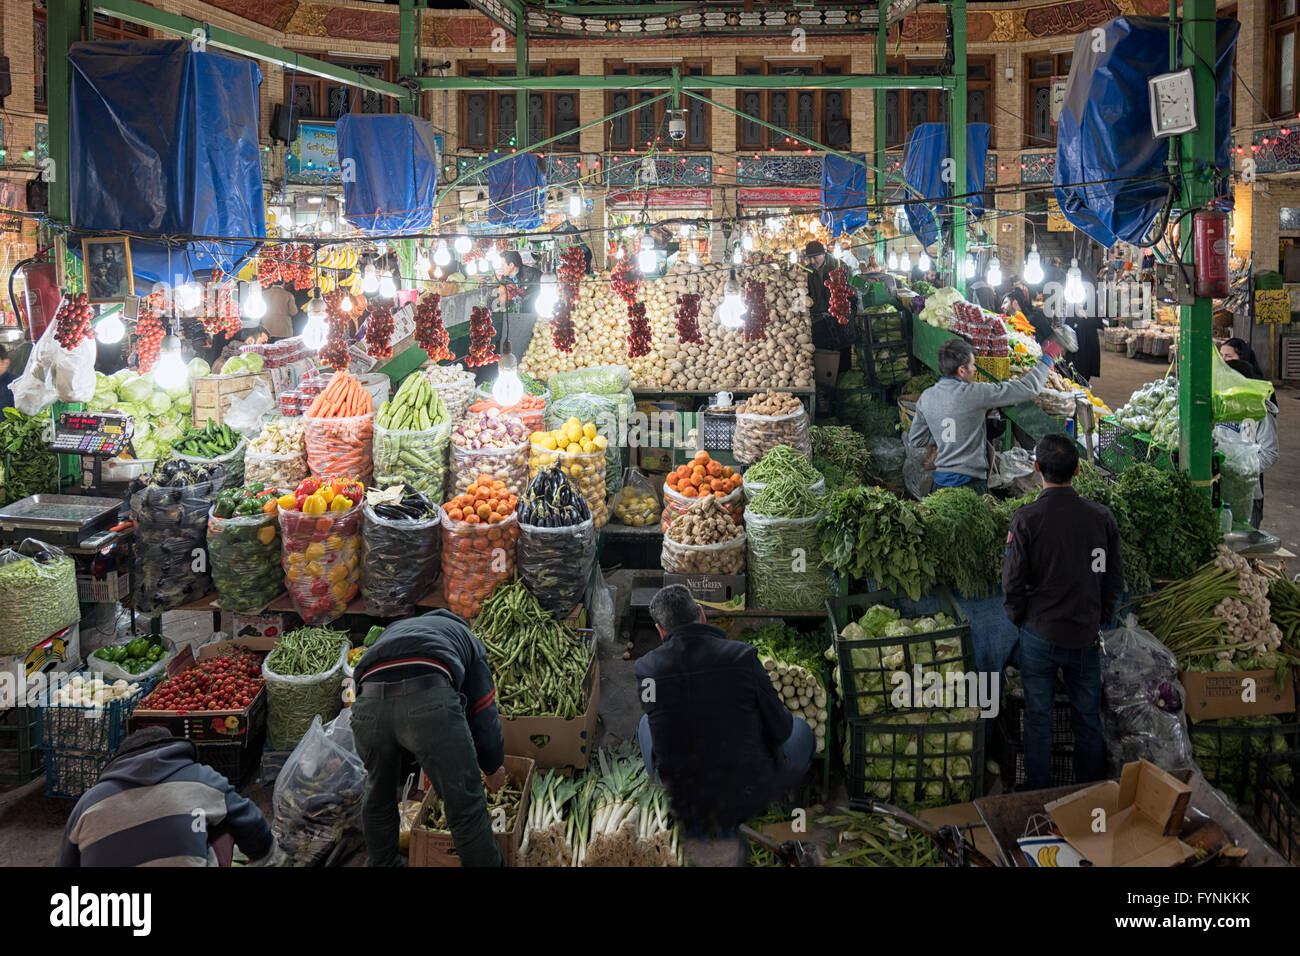 Fresh fruits and vegetables for sale in a local market in Tehran, Iran. Stock Photo